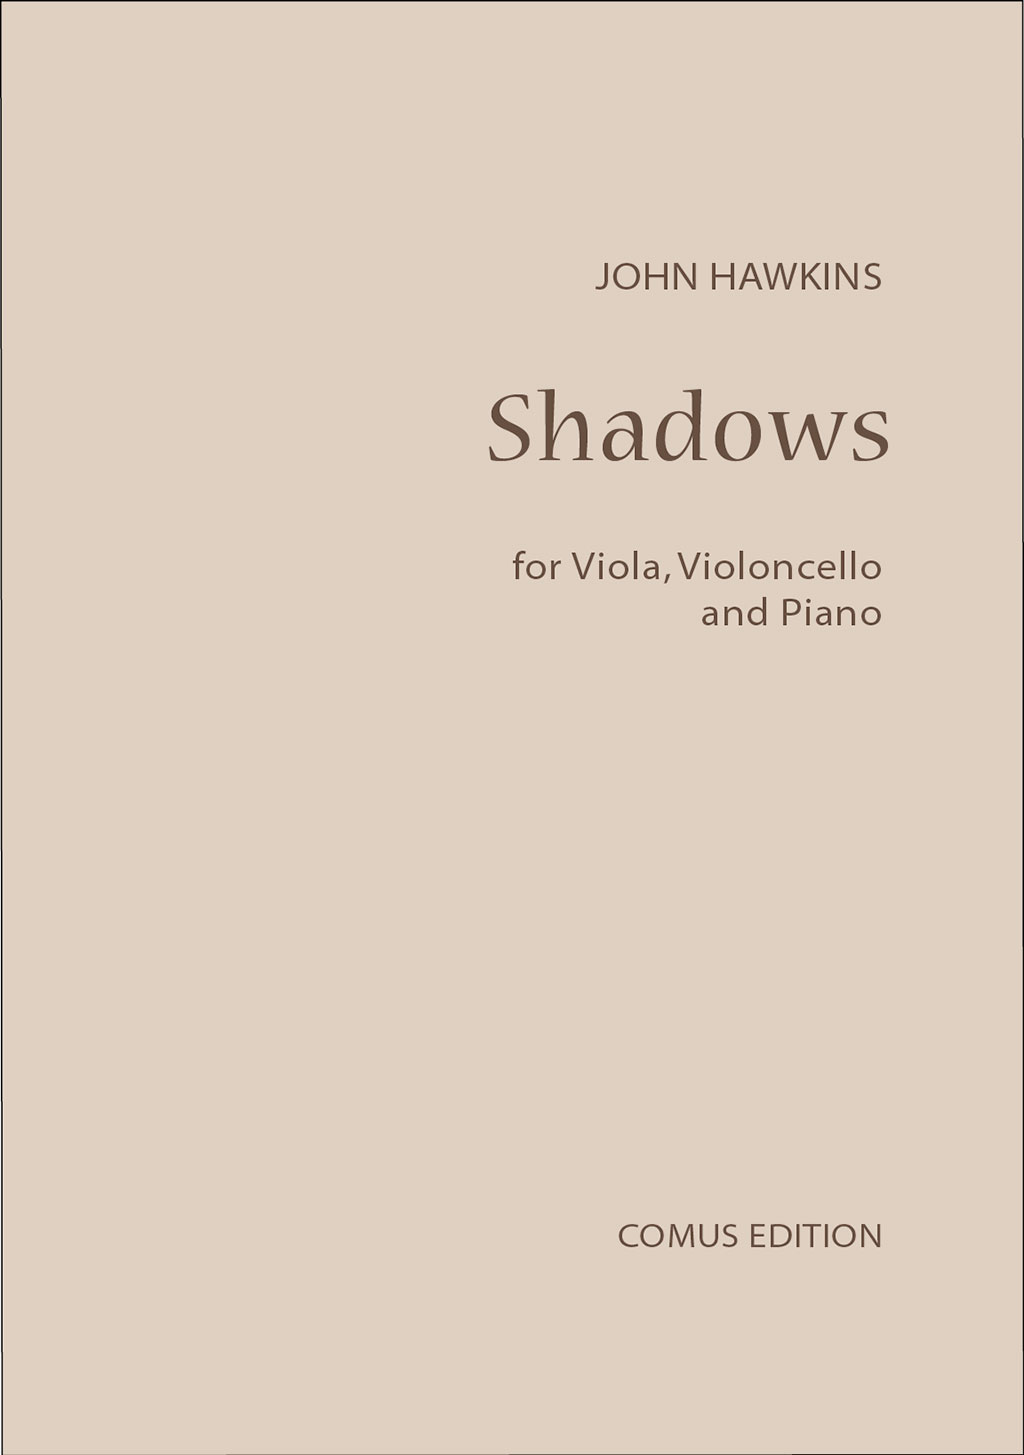 Outer cover of item Shadows